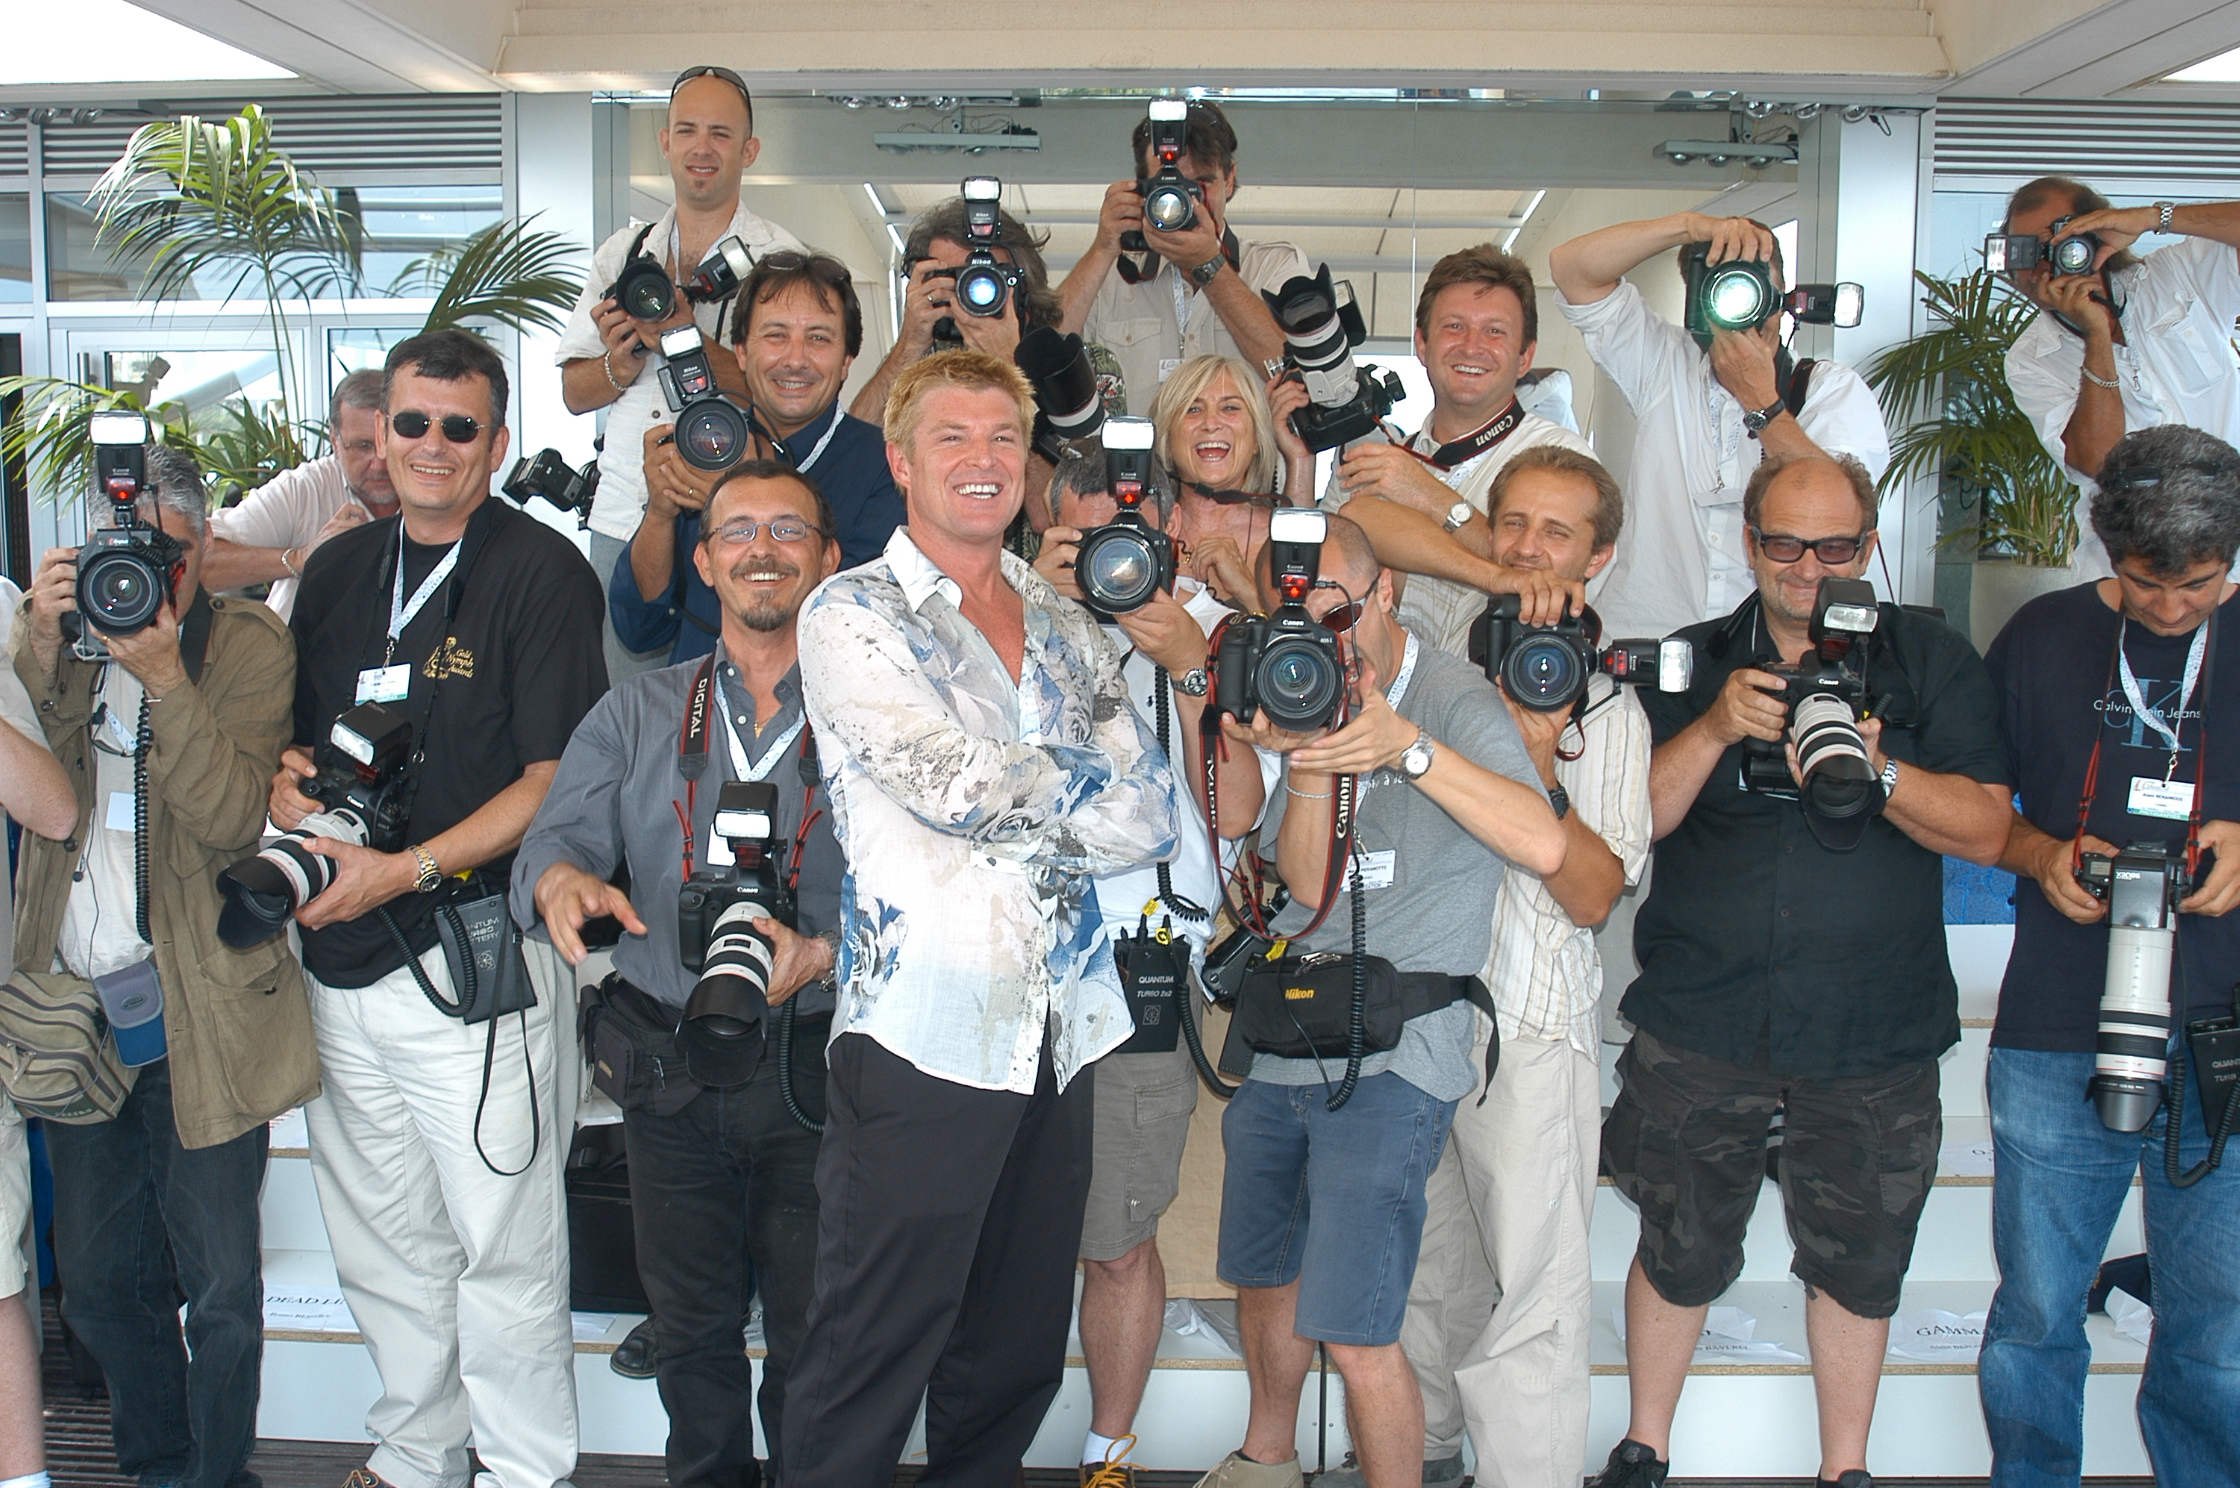 WINSOR HARMON Hanging with the paparazzi in MONTE CARLO